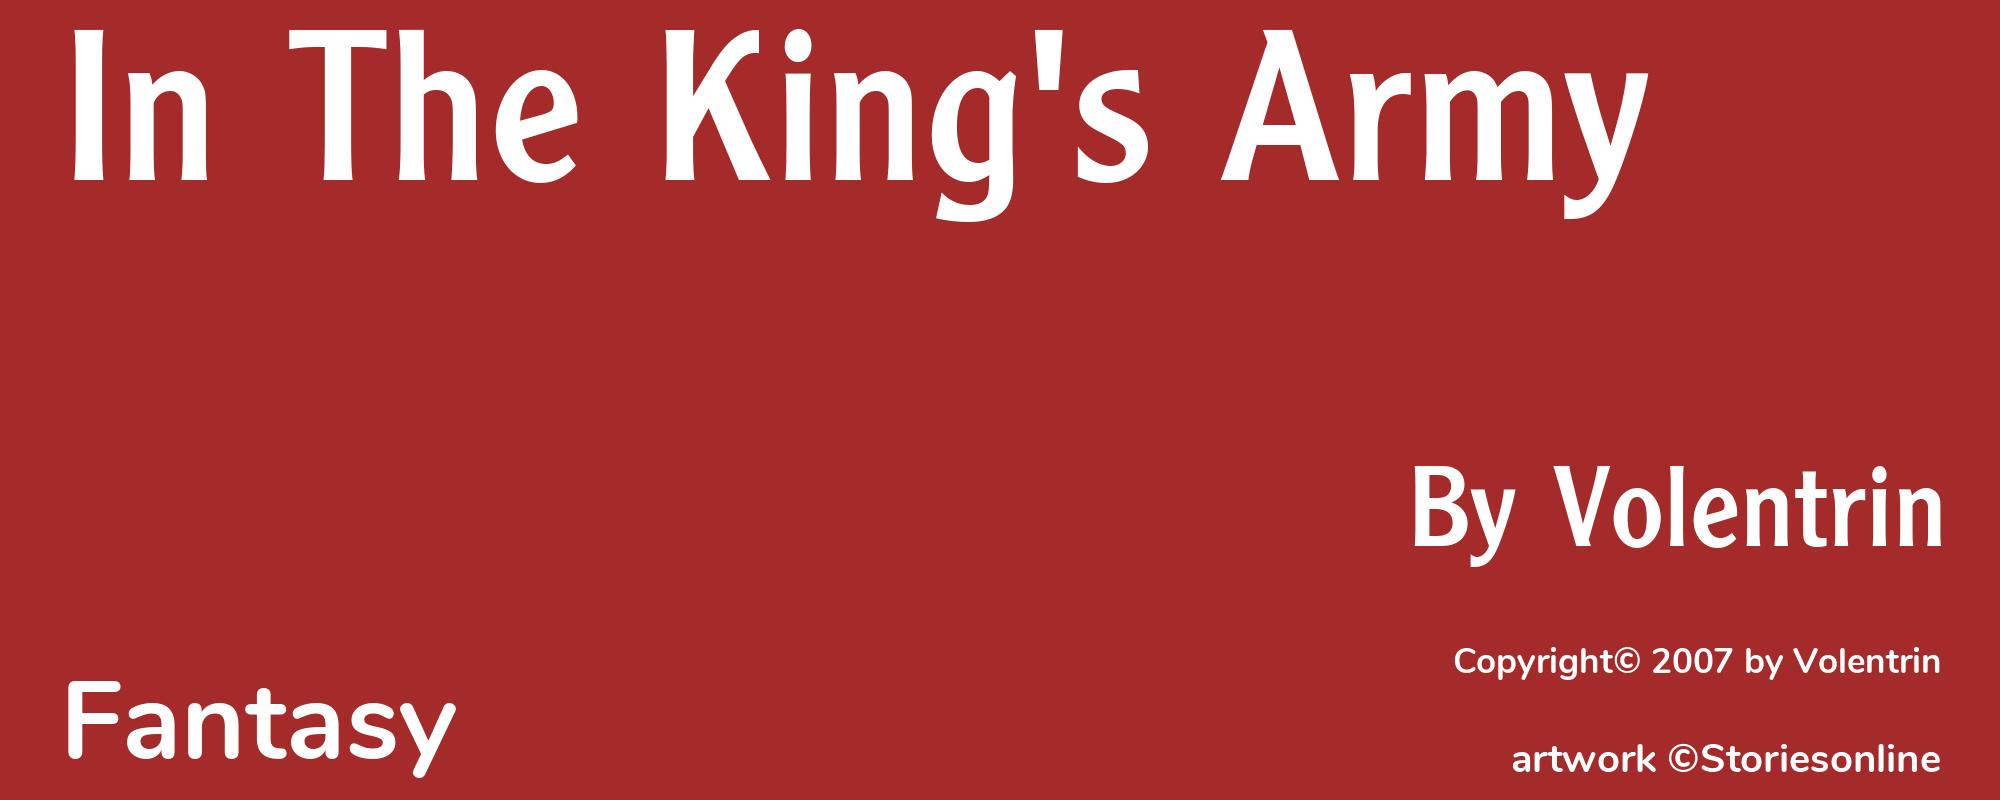 In The King's Army - Cover